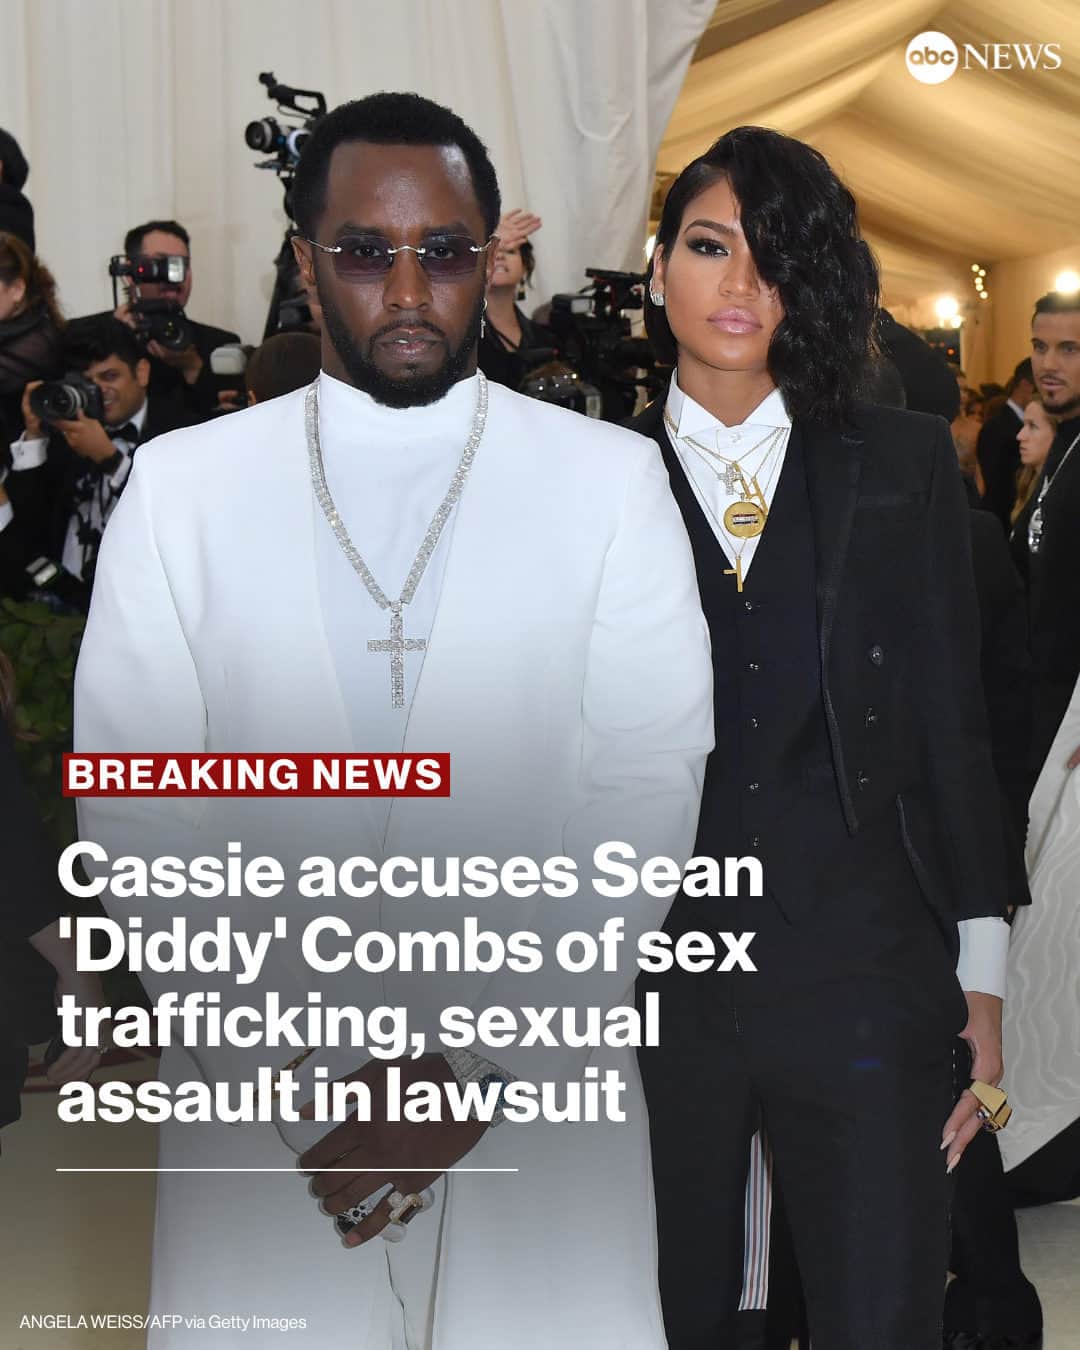 ABC Newsのインスタグラム：「JUST IN: Singer and actress Cassie has filed a lawsuit against ex-boyfriend Sean "Diddy" Combs, accusing him of sex trafficking and sexual assault, according to court documents obtained by ABC News.  According to the lawsuit, the abuse started when Cassie was 19 and Combs allegedly lured her into a professional and sexual relationship. Read more at the link in bio.」